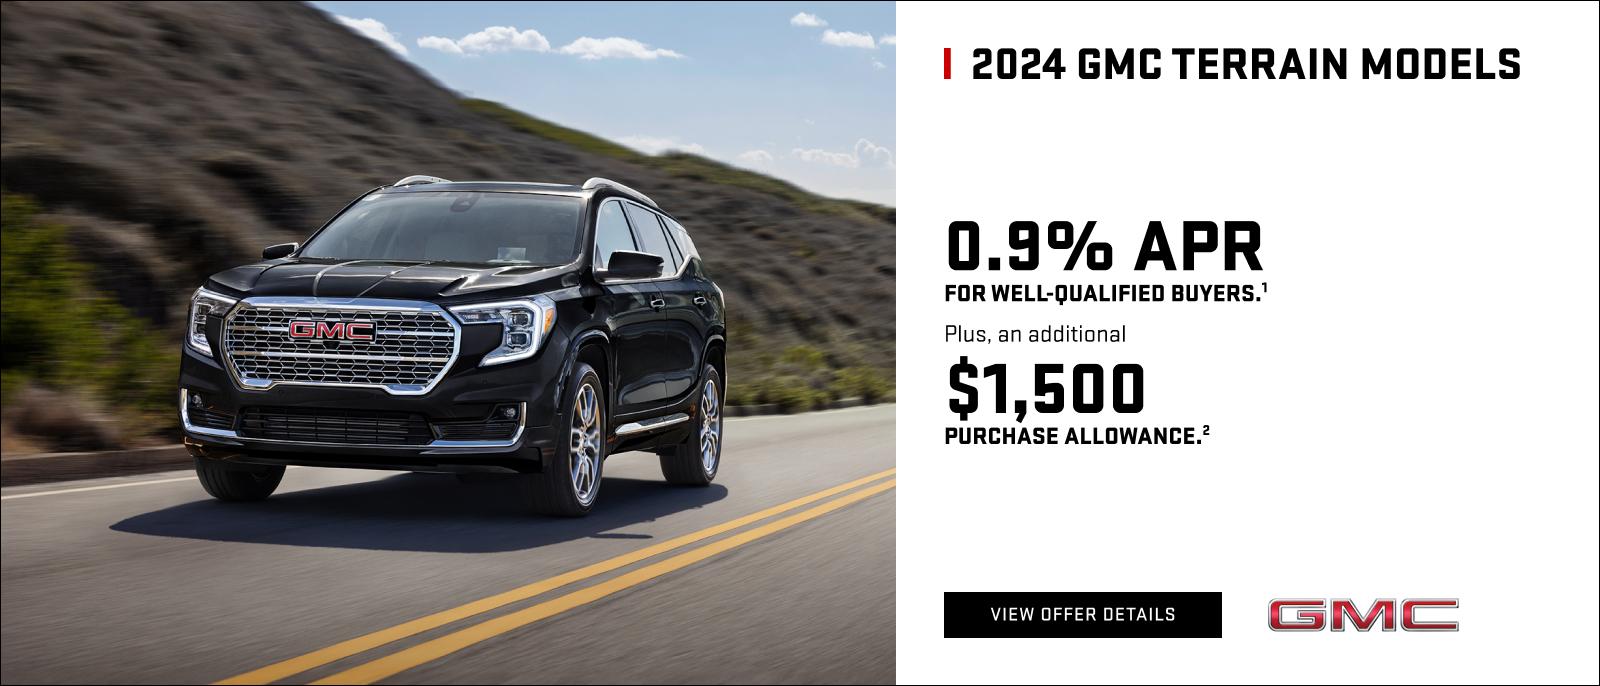 0.9% APR for well-qualified buyers.1

Plus, receive an additional $1,500 PURCHASE ALLOWANCE.2